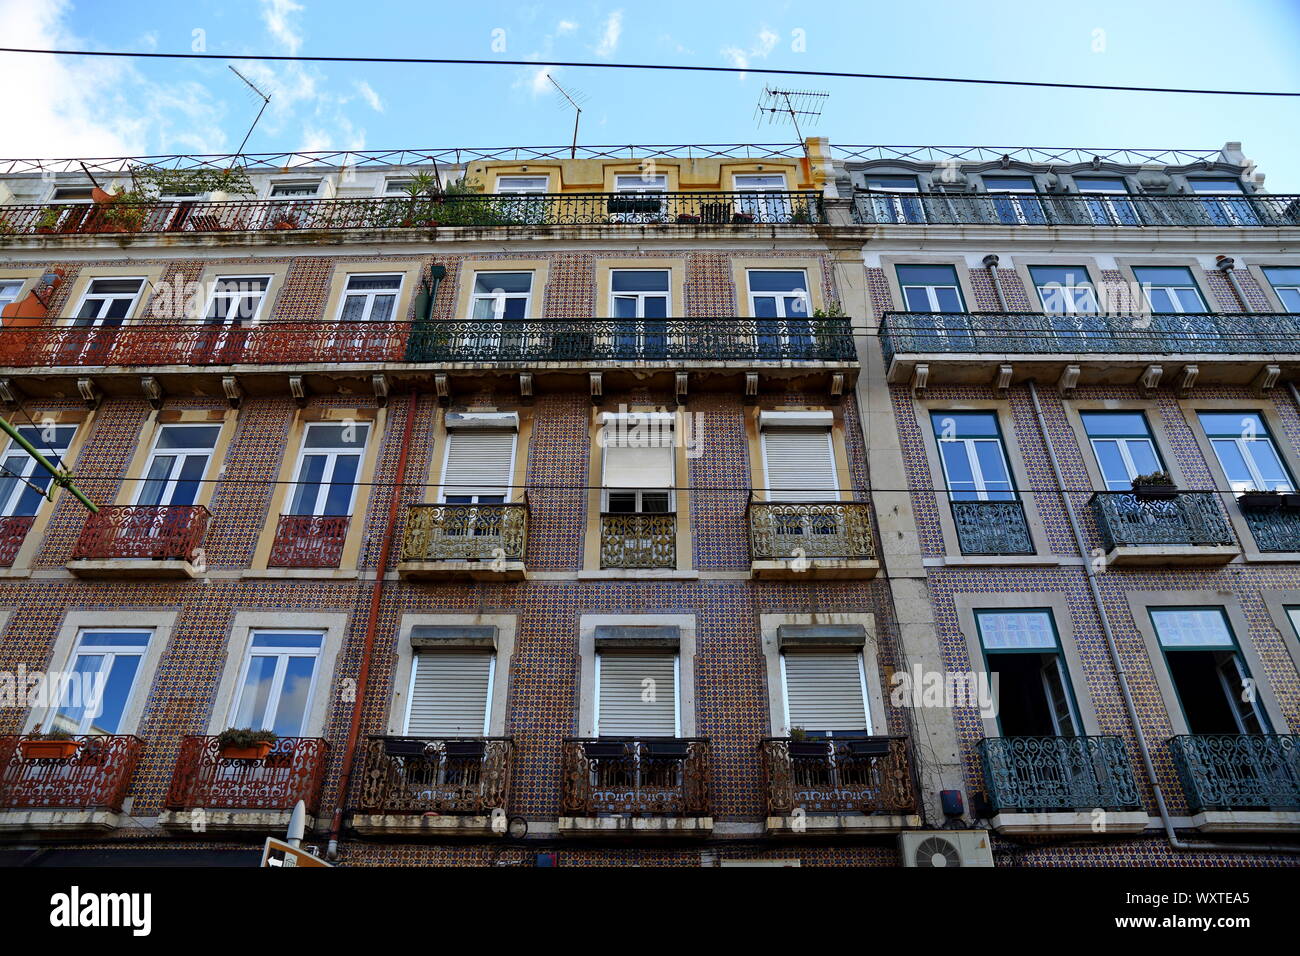 Traditional colorful buildings with azulejo tiles facade in the old Lisbon neighborhoods Portugal Stock Photo